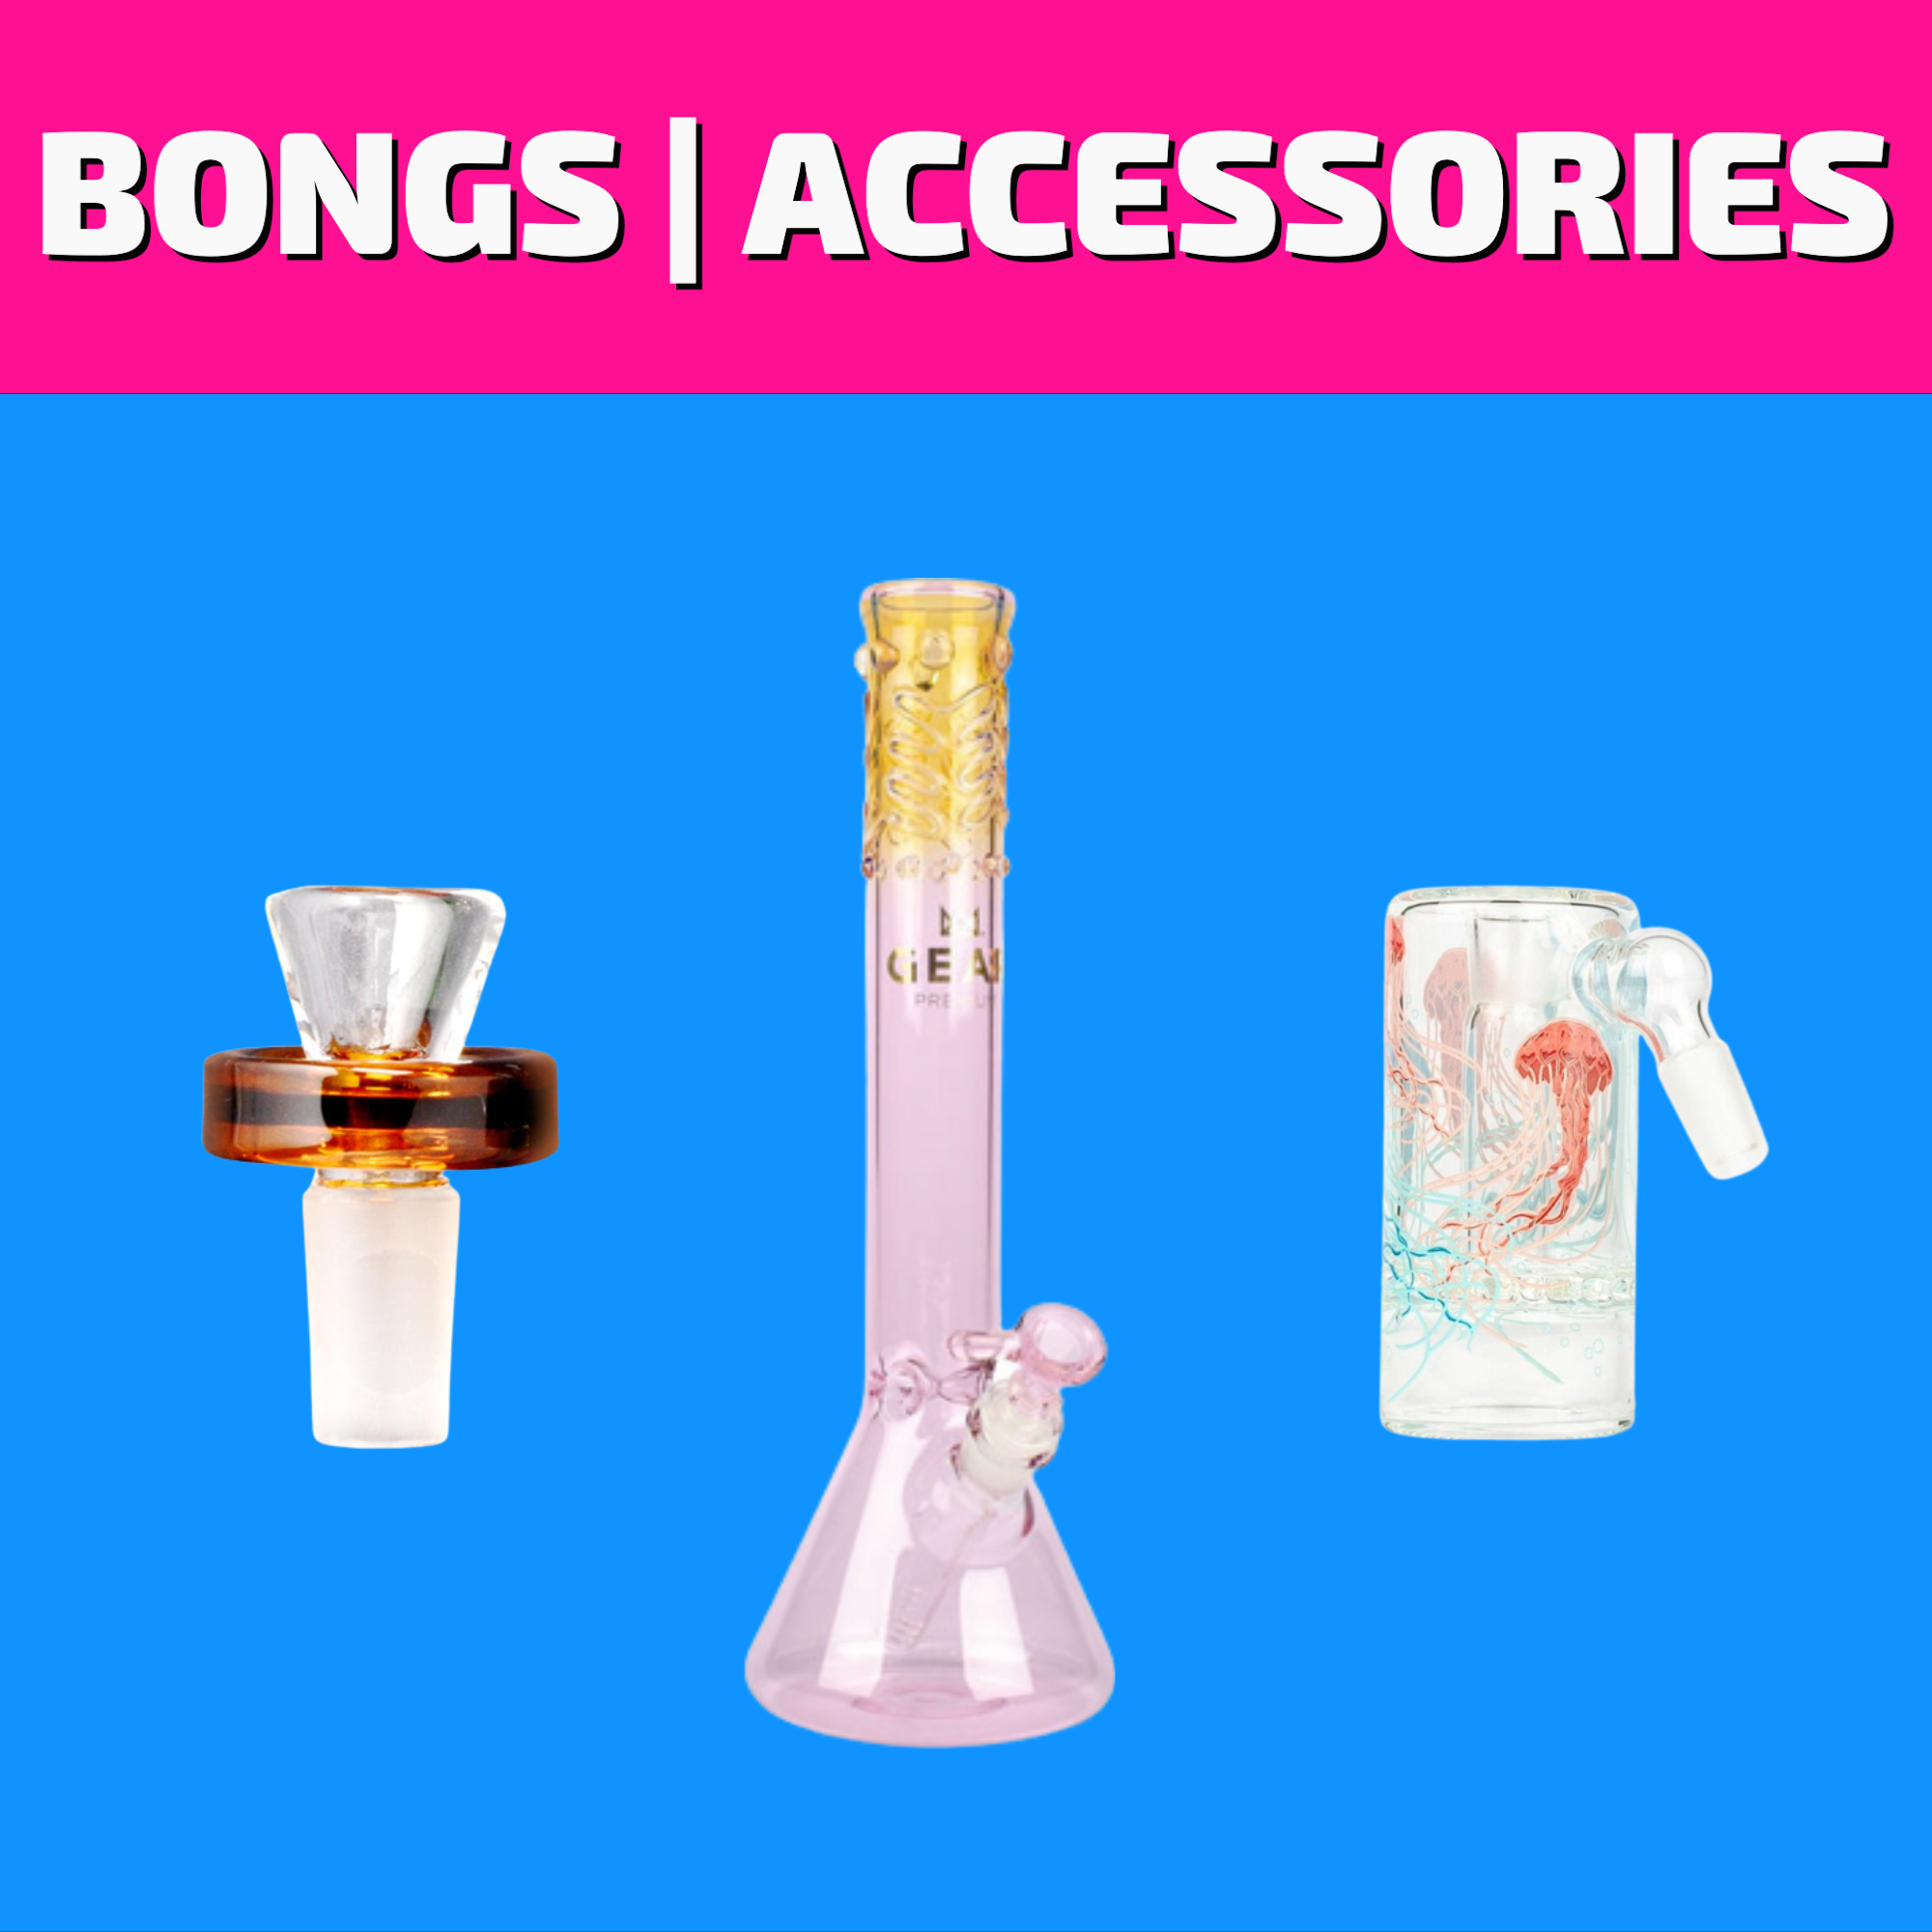 Shop the best selection of Bongs, Bowls, Cleaners, and Ash Catchers online for same day delivery in Winnipeg or visit our dispensary on 580 Academy Road.  